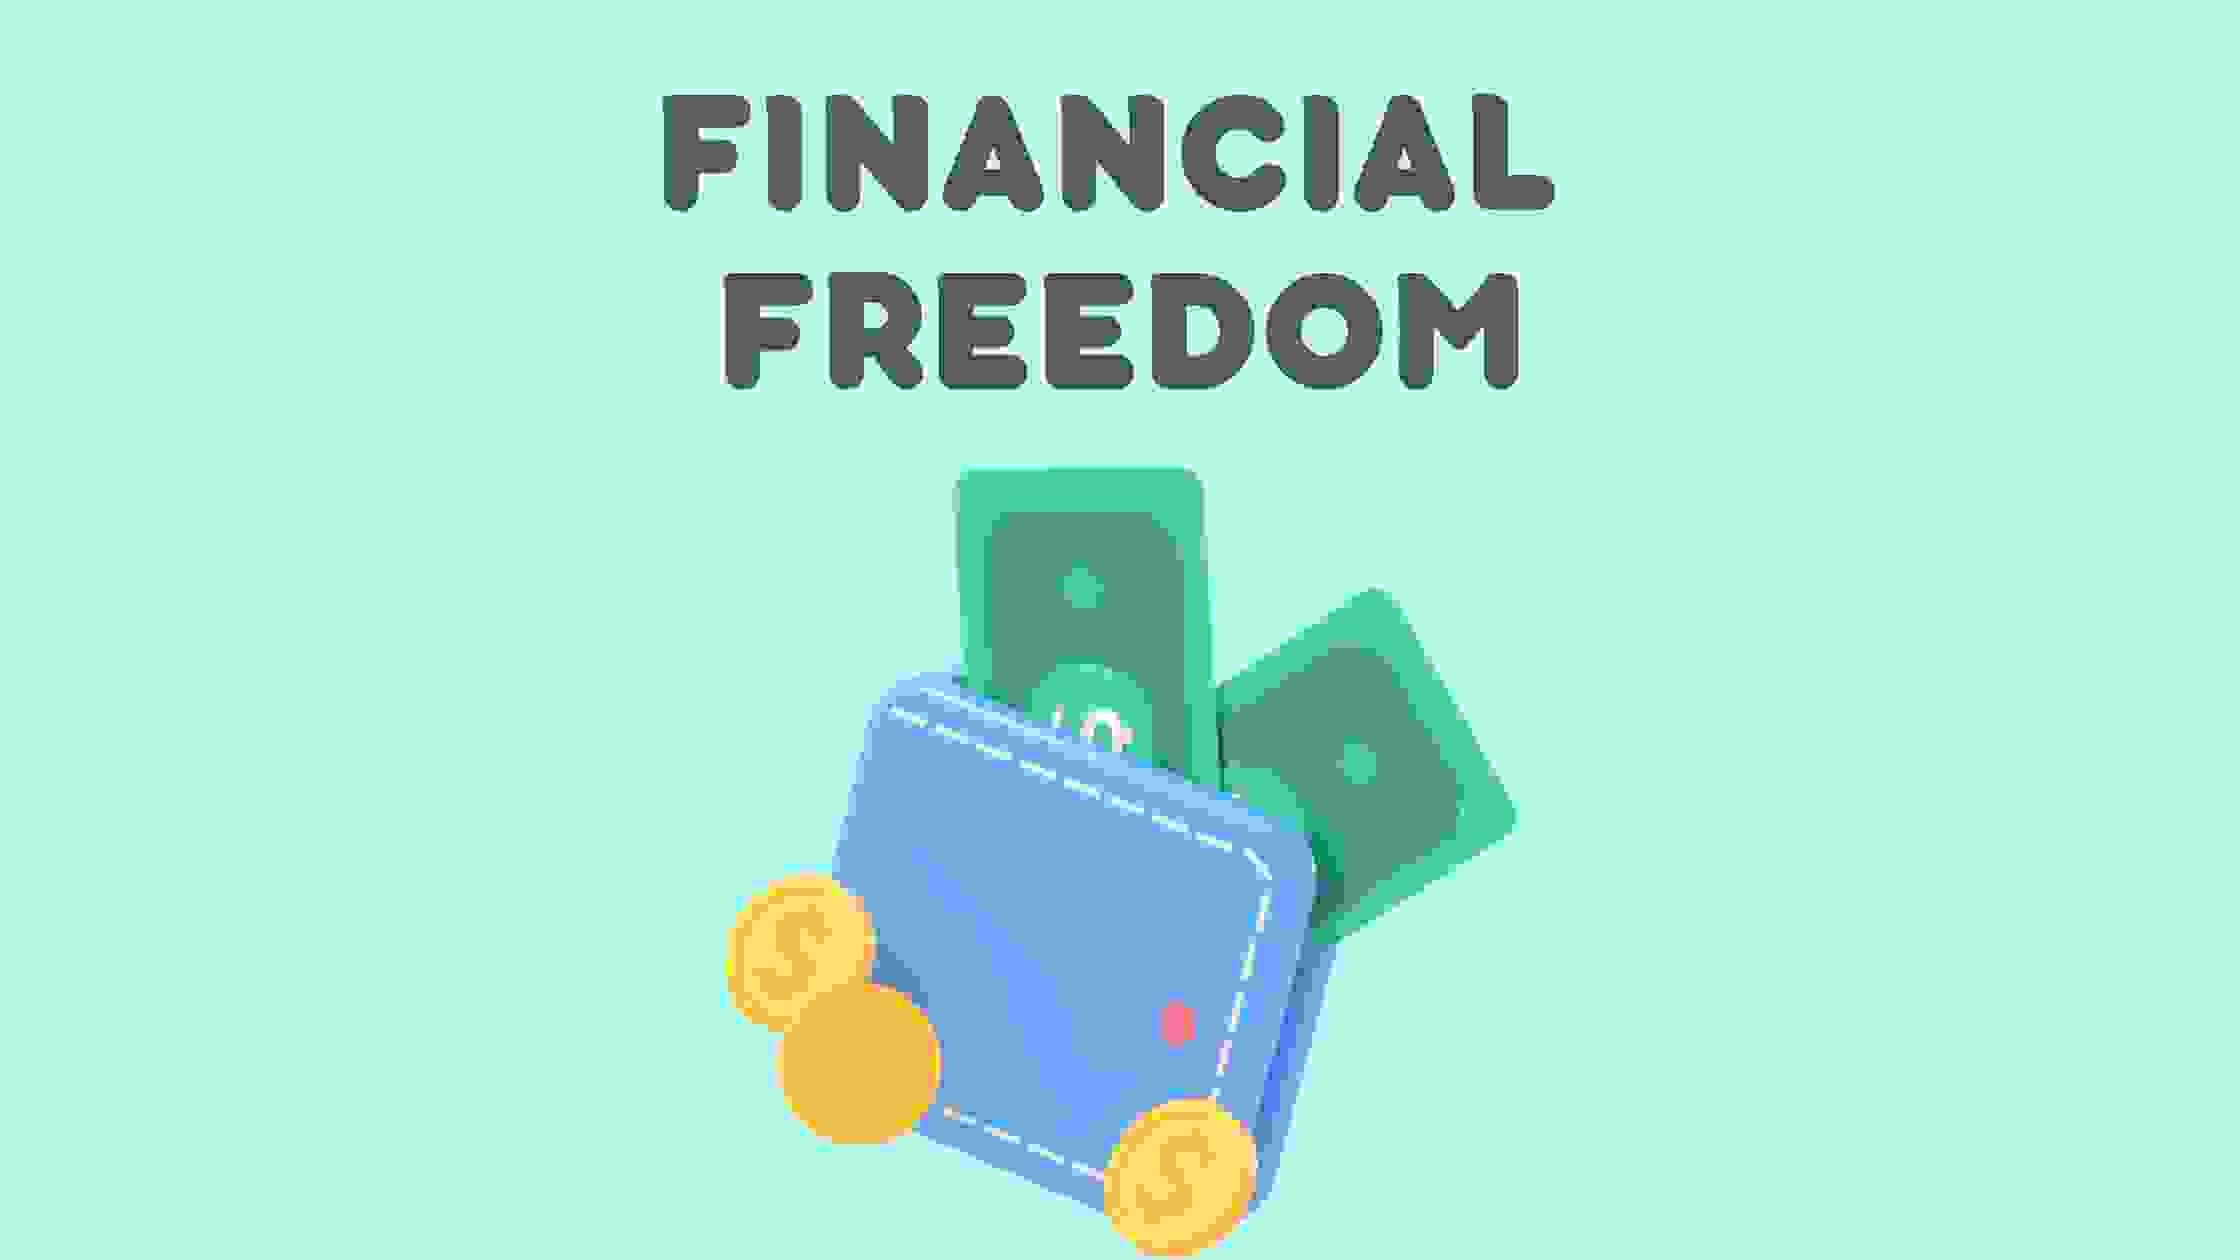 Financial Freedom Meaning in Hindi